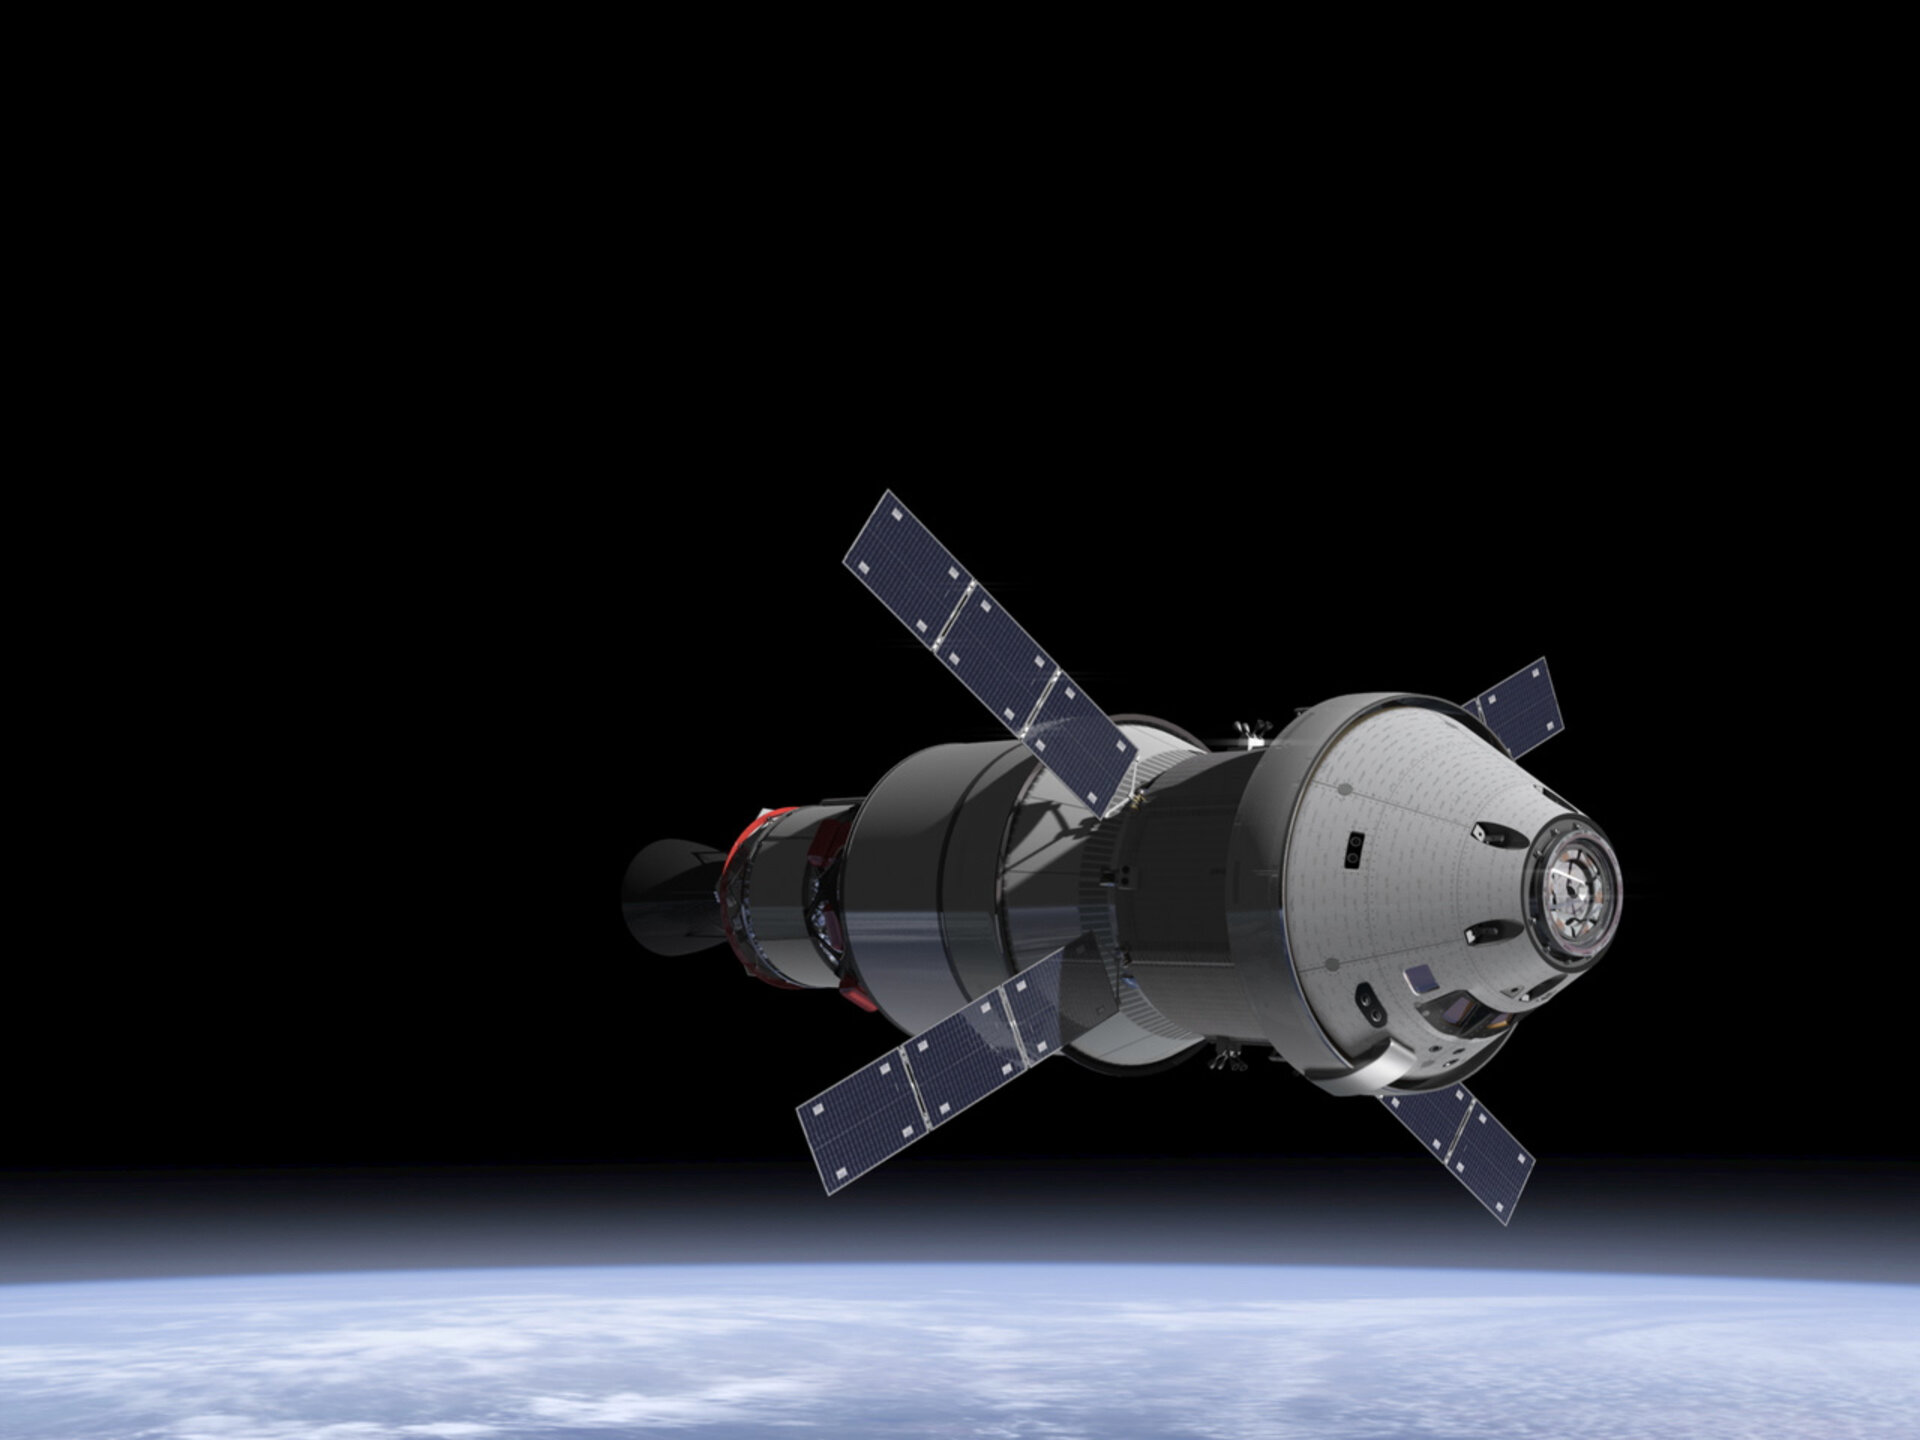 Orion with service module and propulsion stage